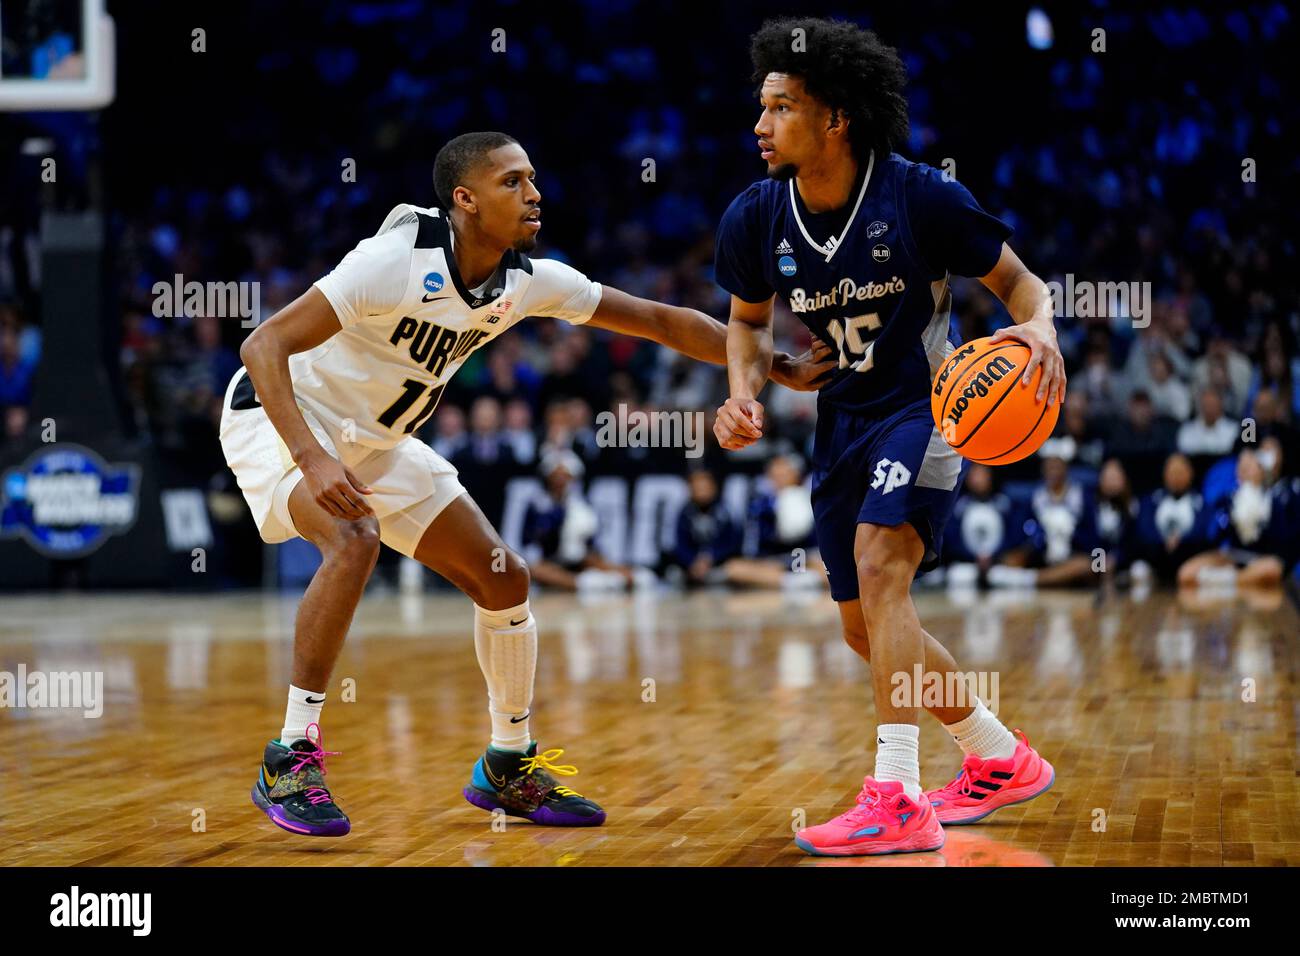 Saint Peter's Matthew Lee, right, dribbles against Purdue's Isaiah Thompson  during the first half of a college basketball game in the Sweet 16 round of  the NCAA tournament, Friday, March 25, 2022,